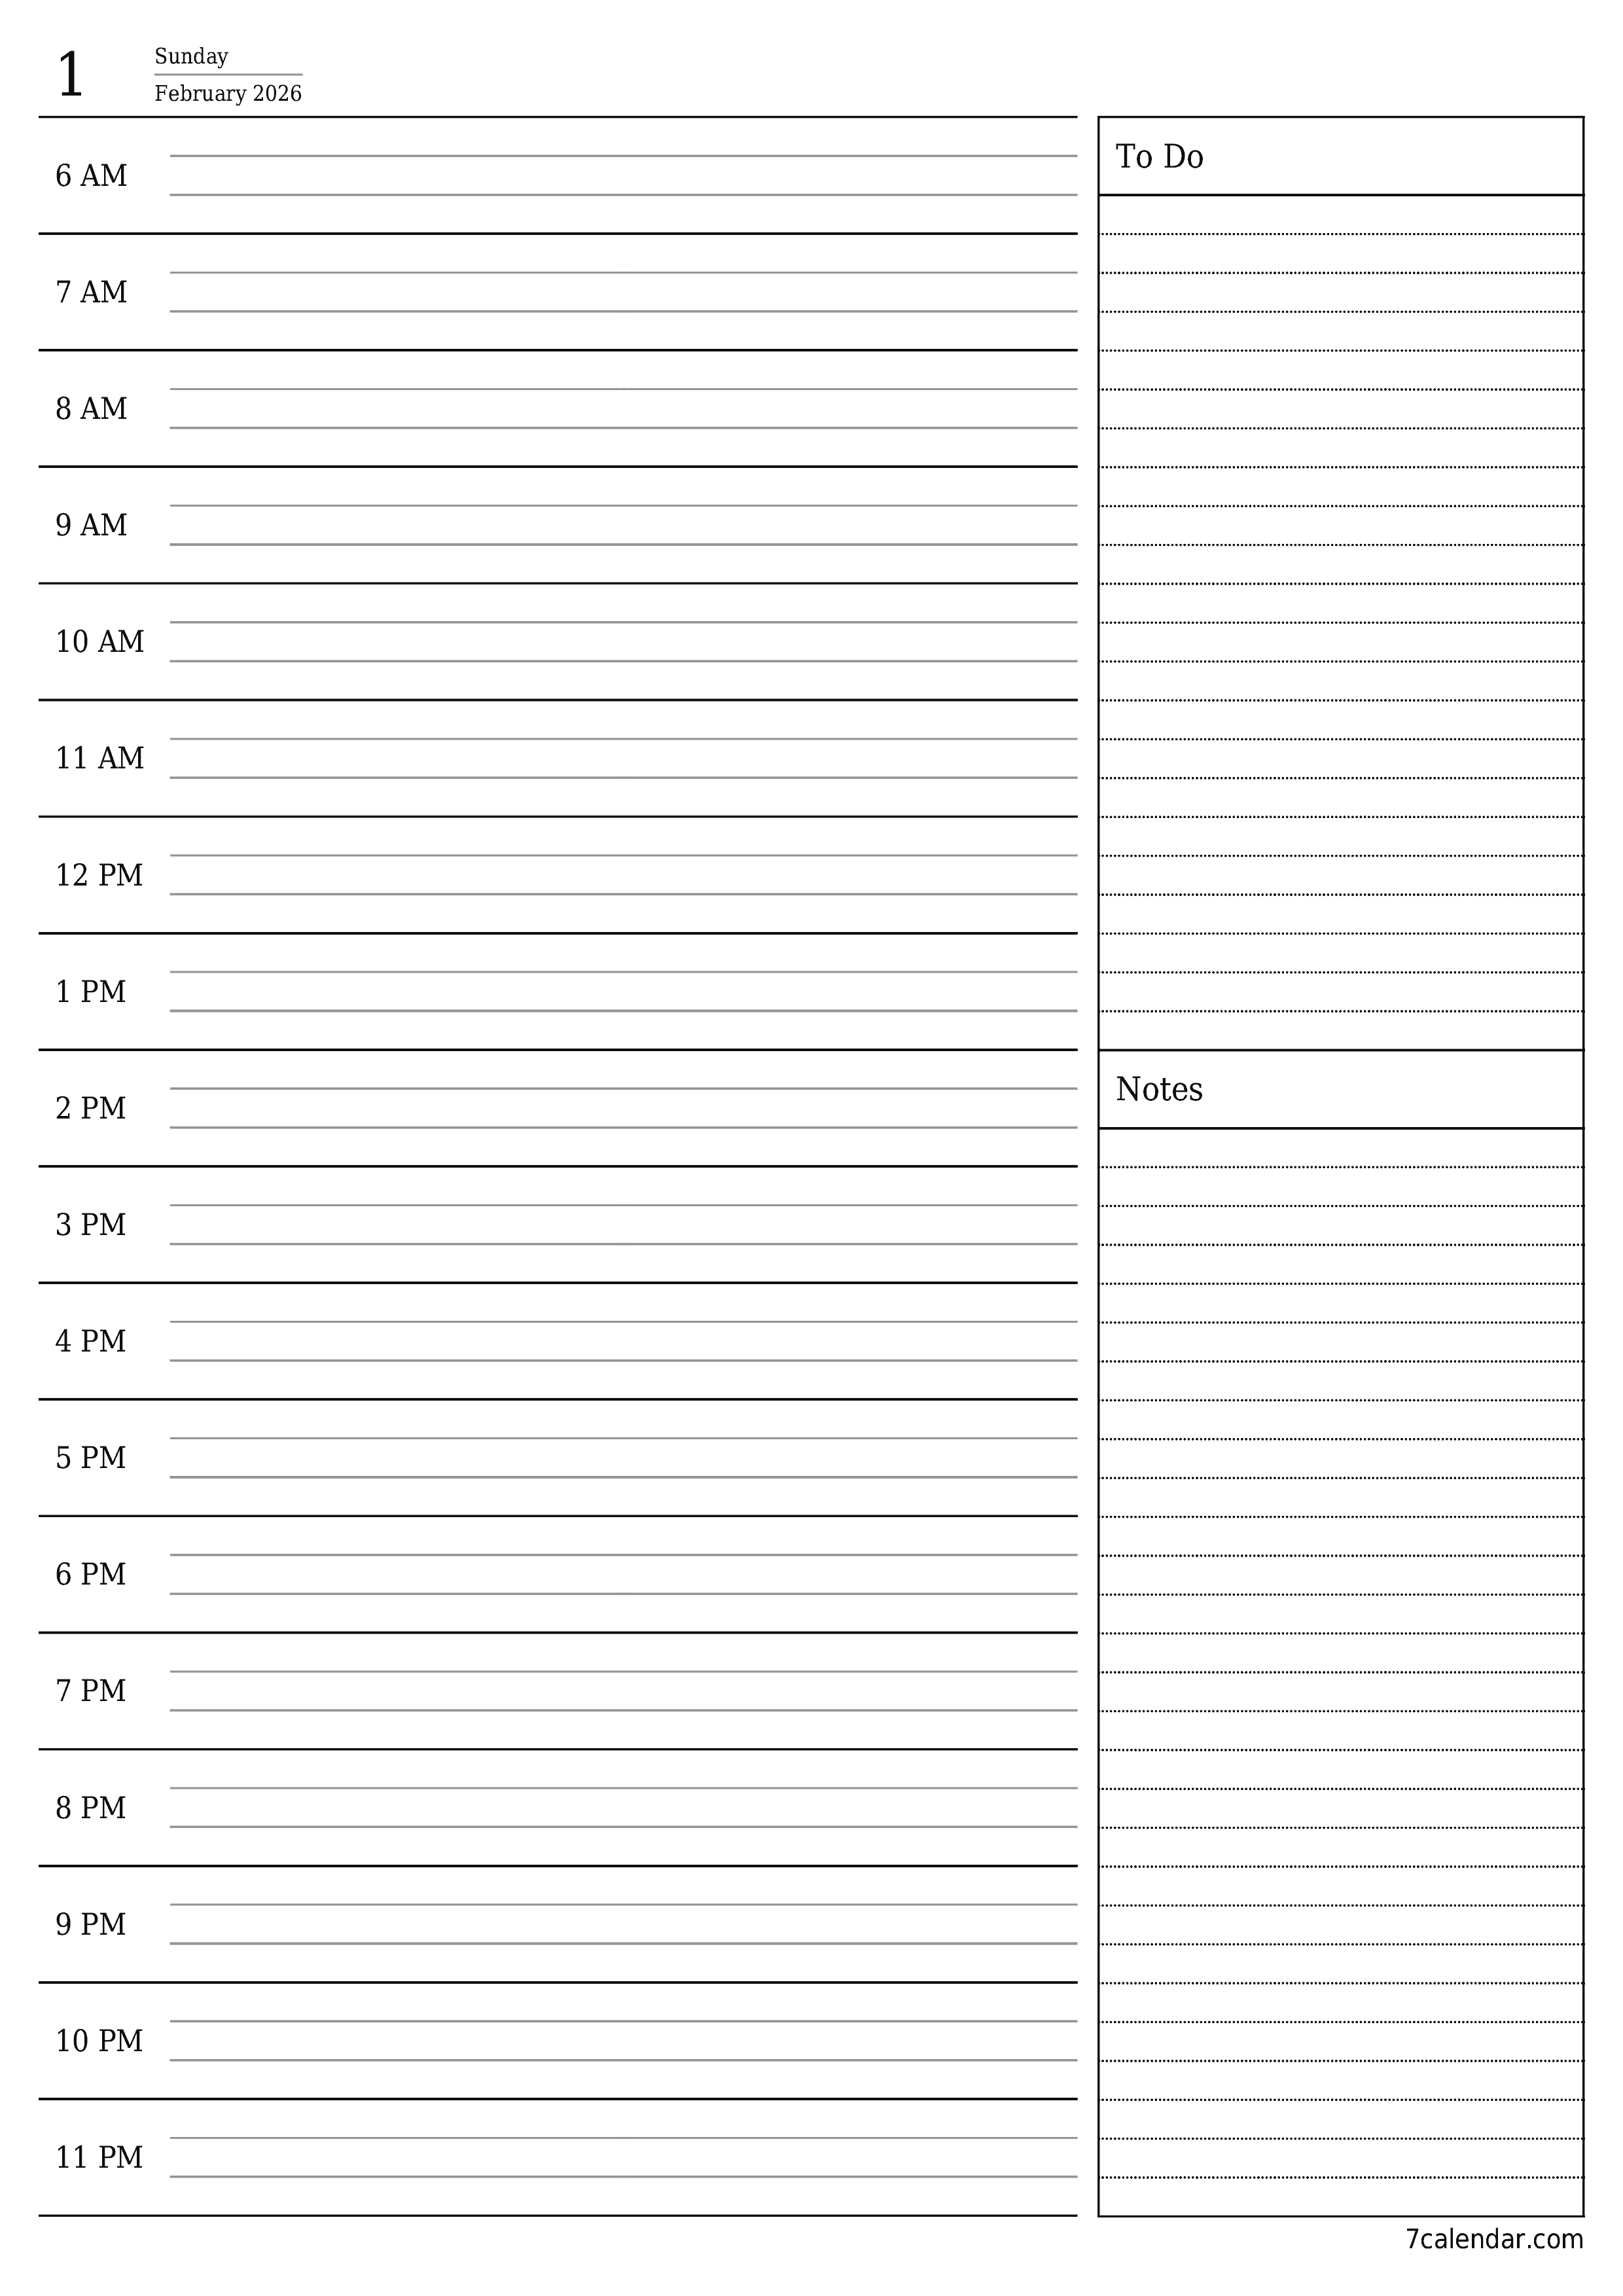 printable wall template free vertical Daily planner calendar February (Feb) 2026